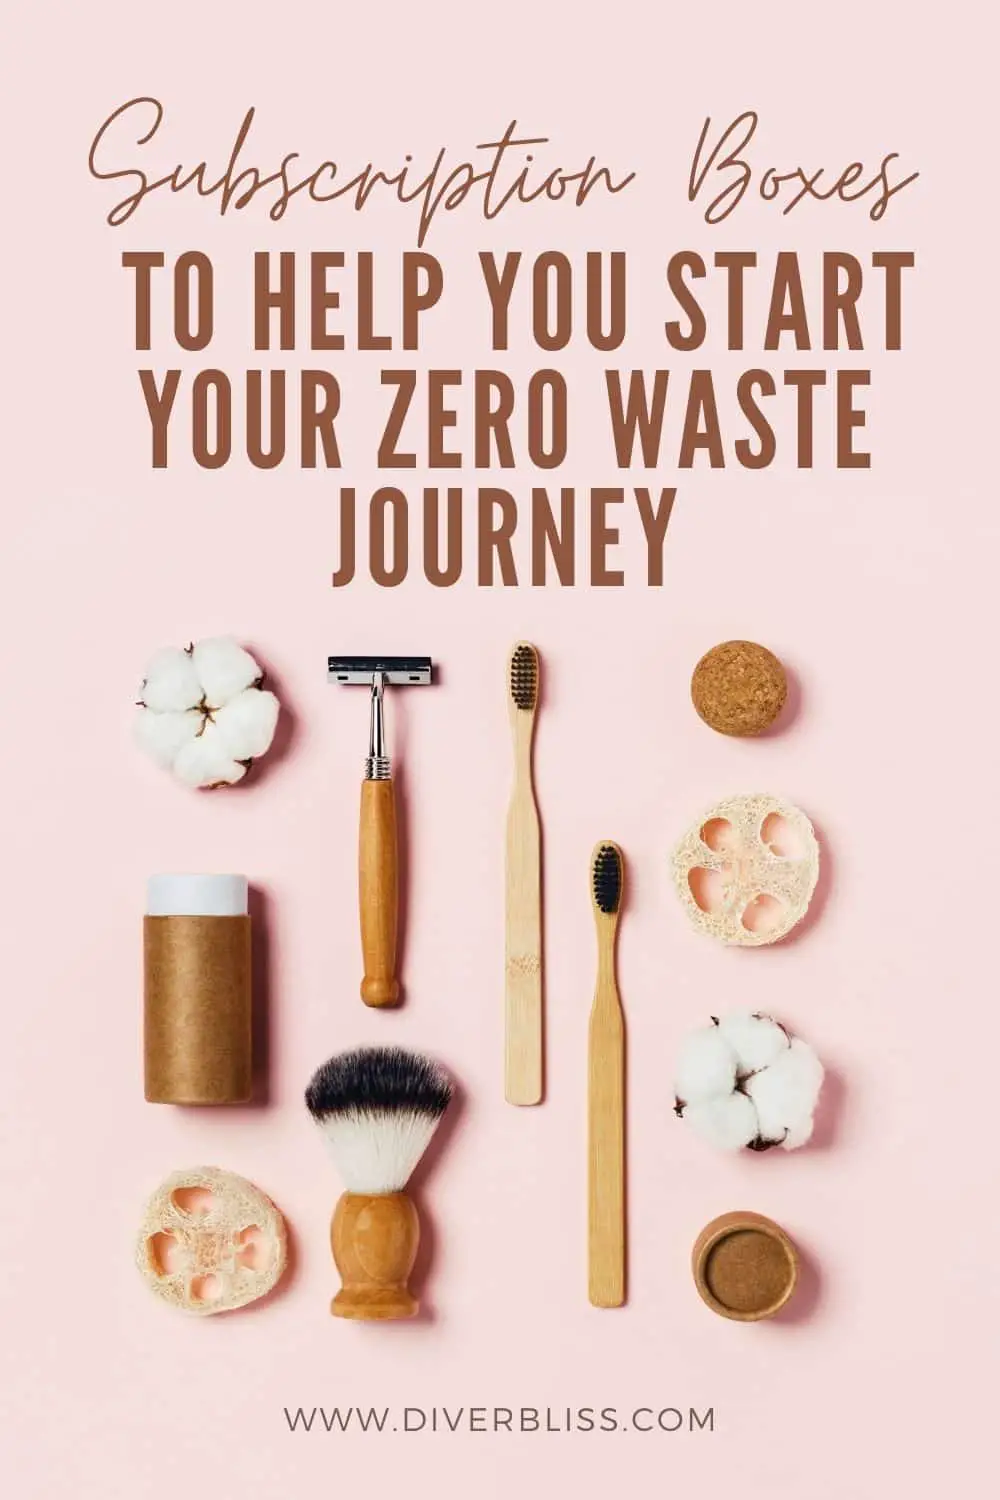 subscription boxes to help you start your zero waste journey